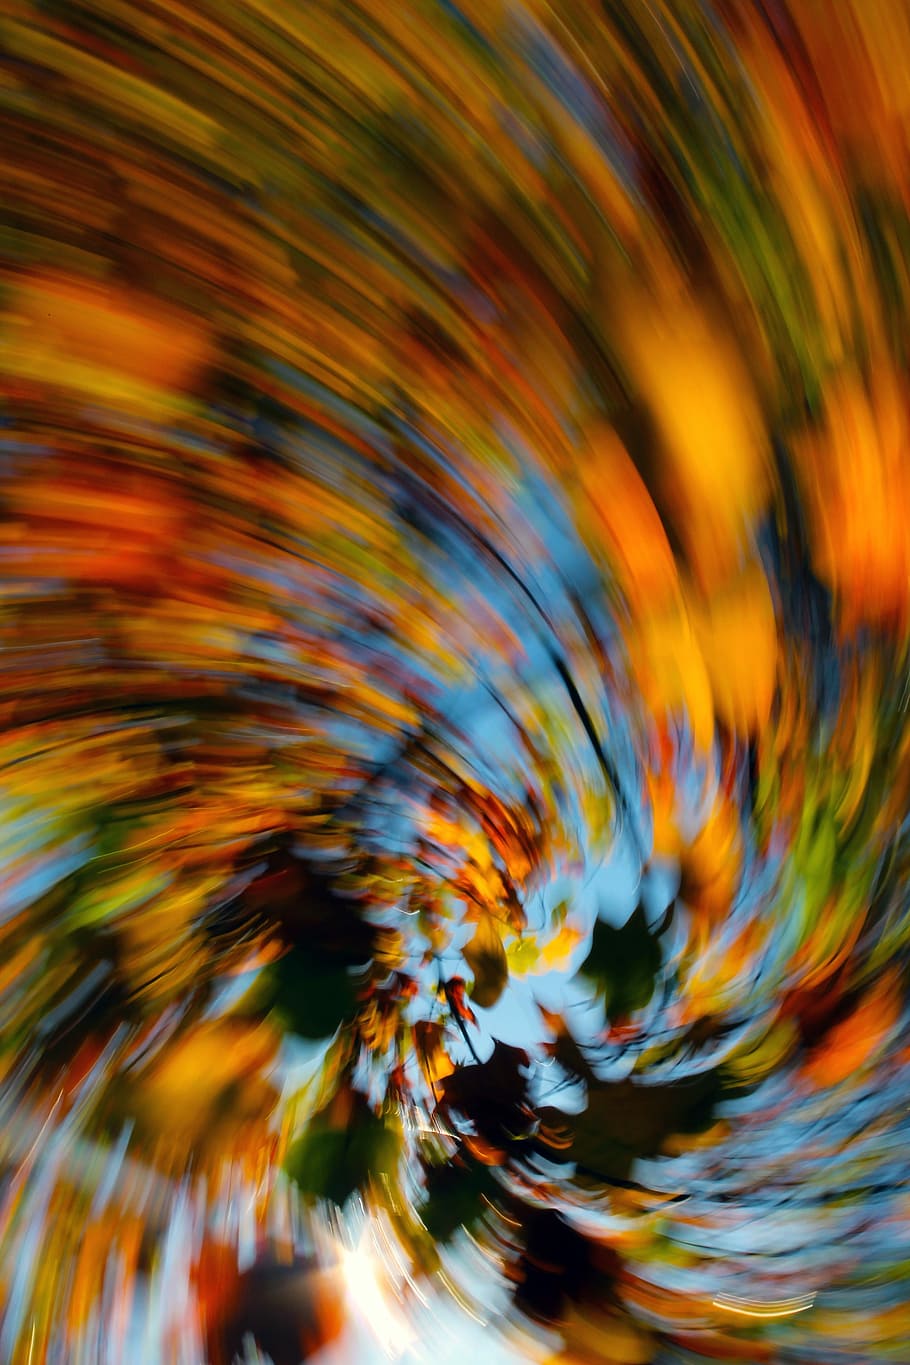 Autumn, Blurry, Colors, Leaves, autumn colors, color, autumn leaves, abstract, blurred motion, backgrounds